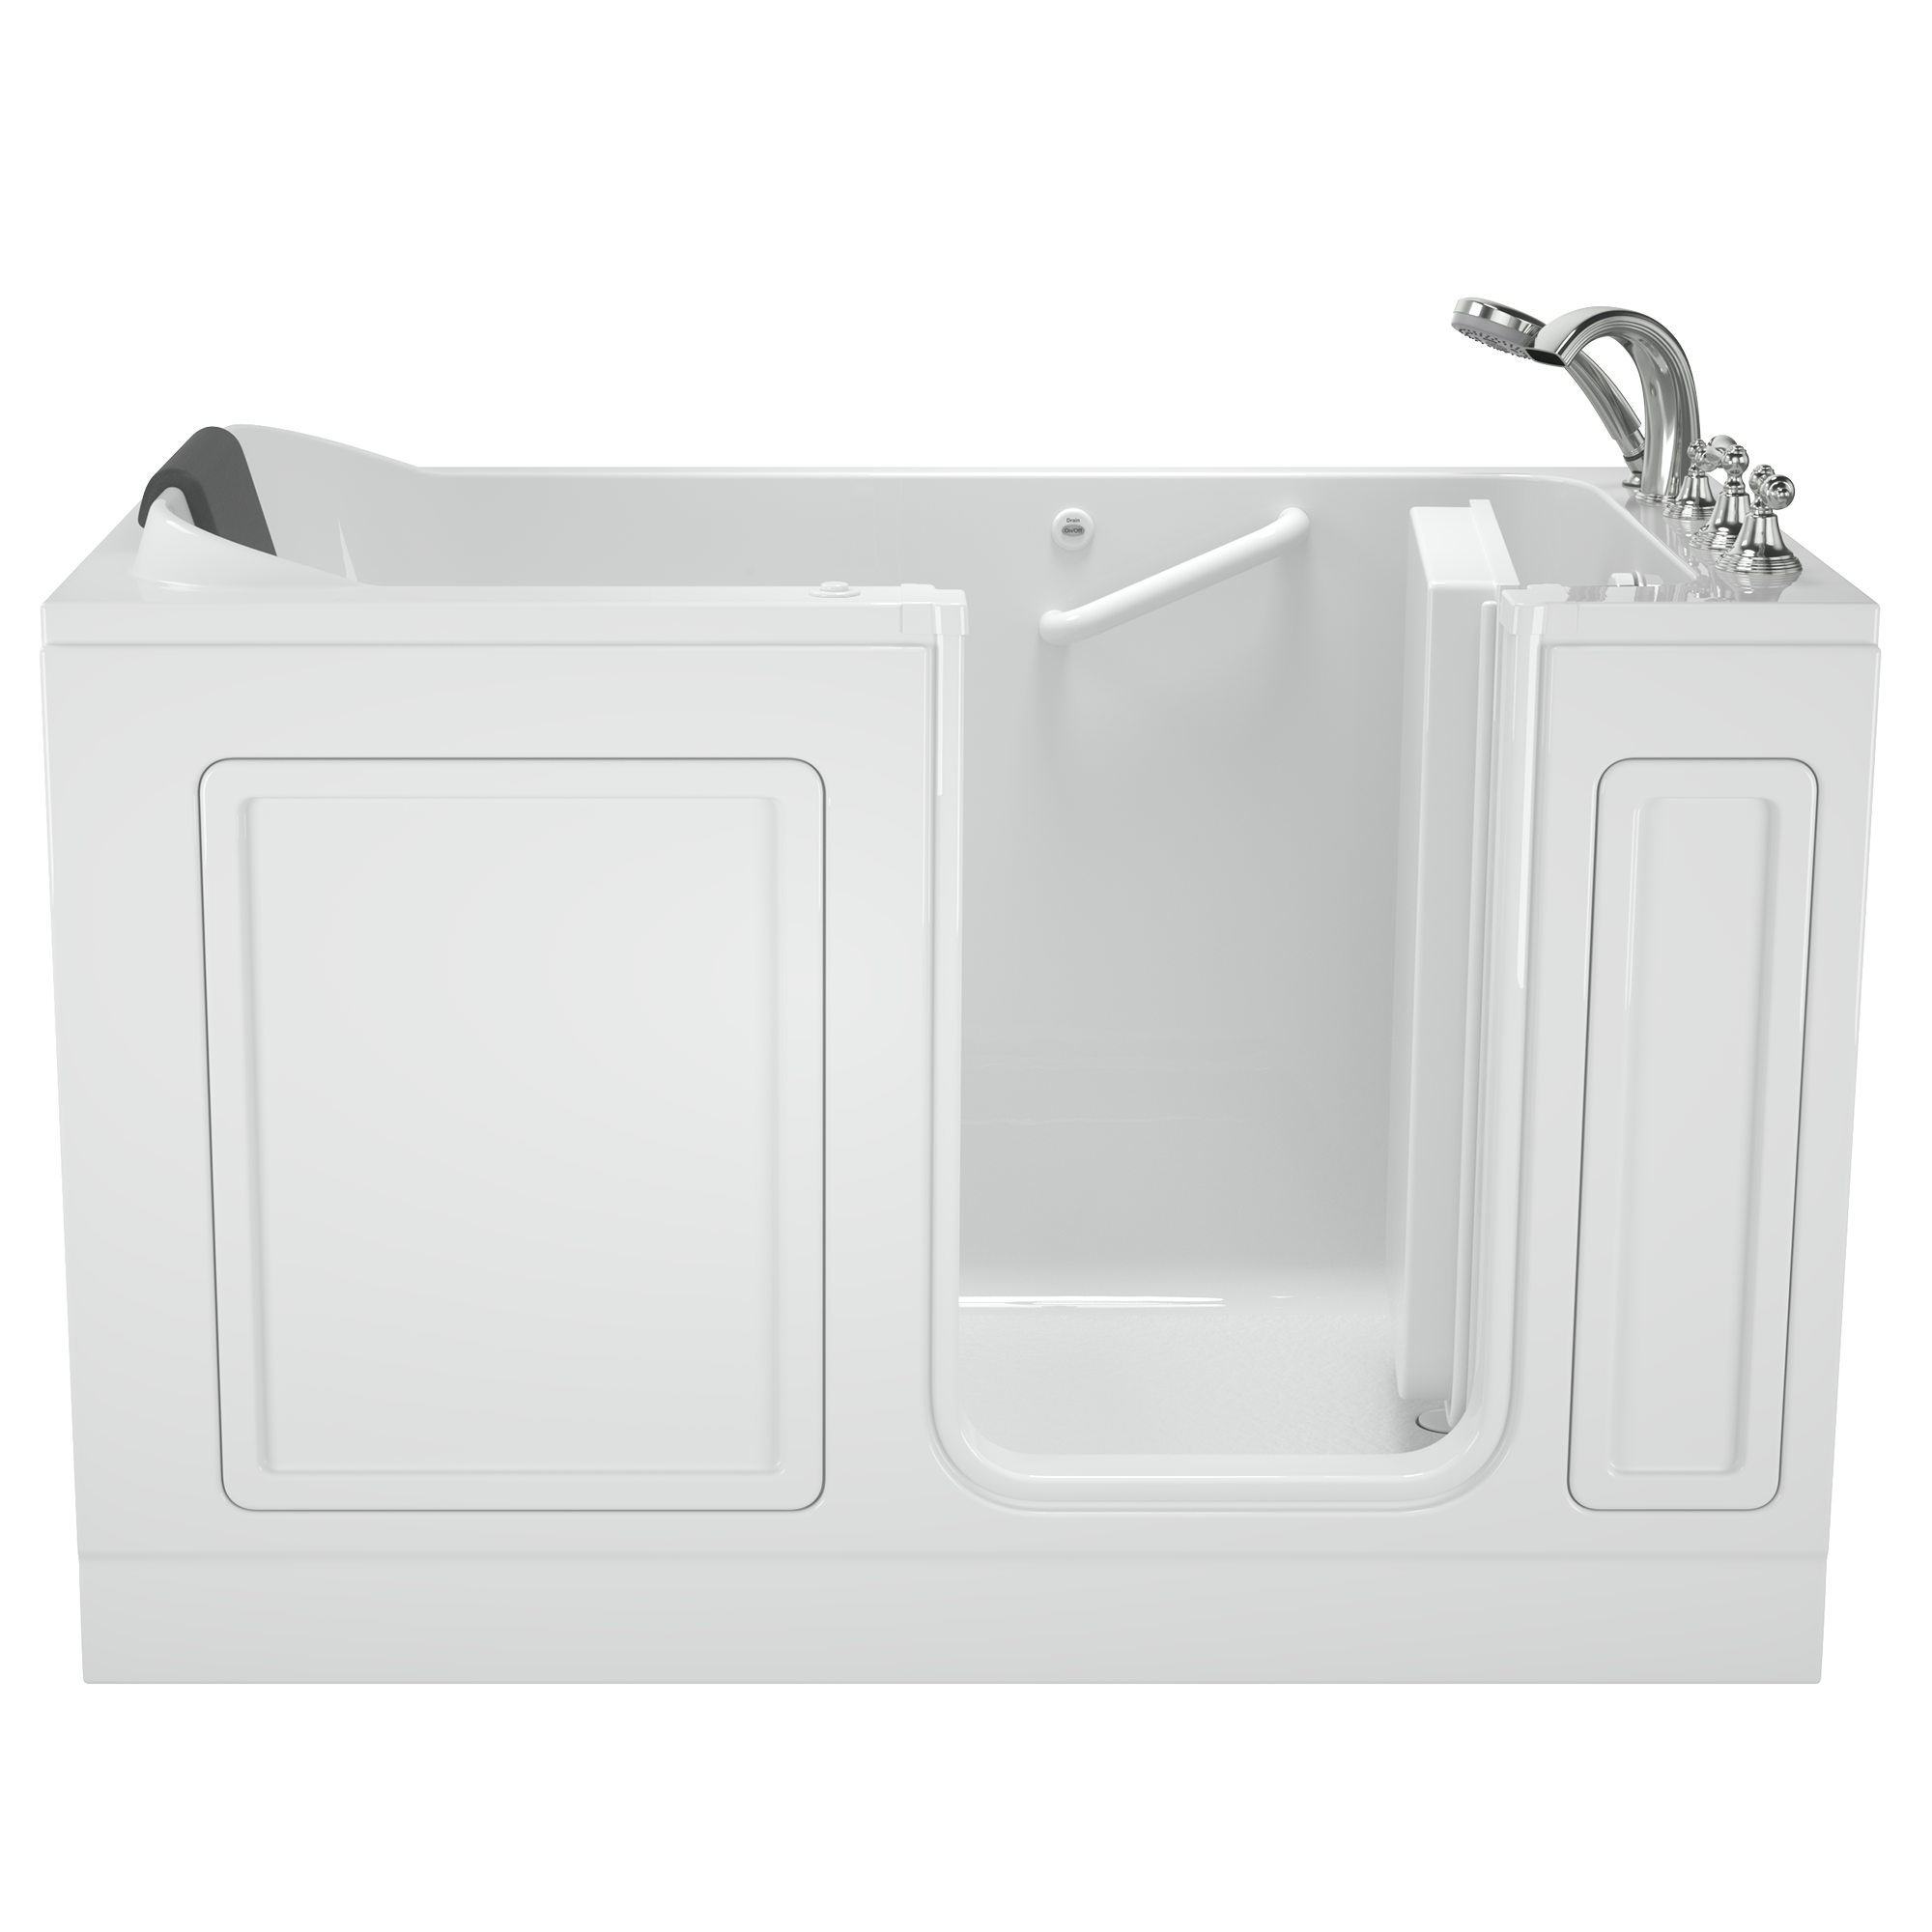 Acrylic Luxury Series 32 x 60 -Inch Walk-in Tub With Air Spa System - Right-Hand Drain With Faucet